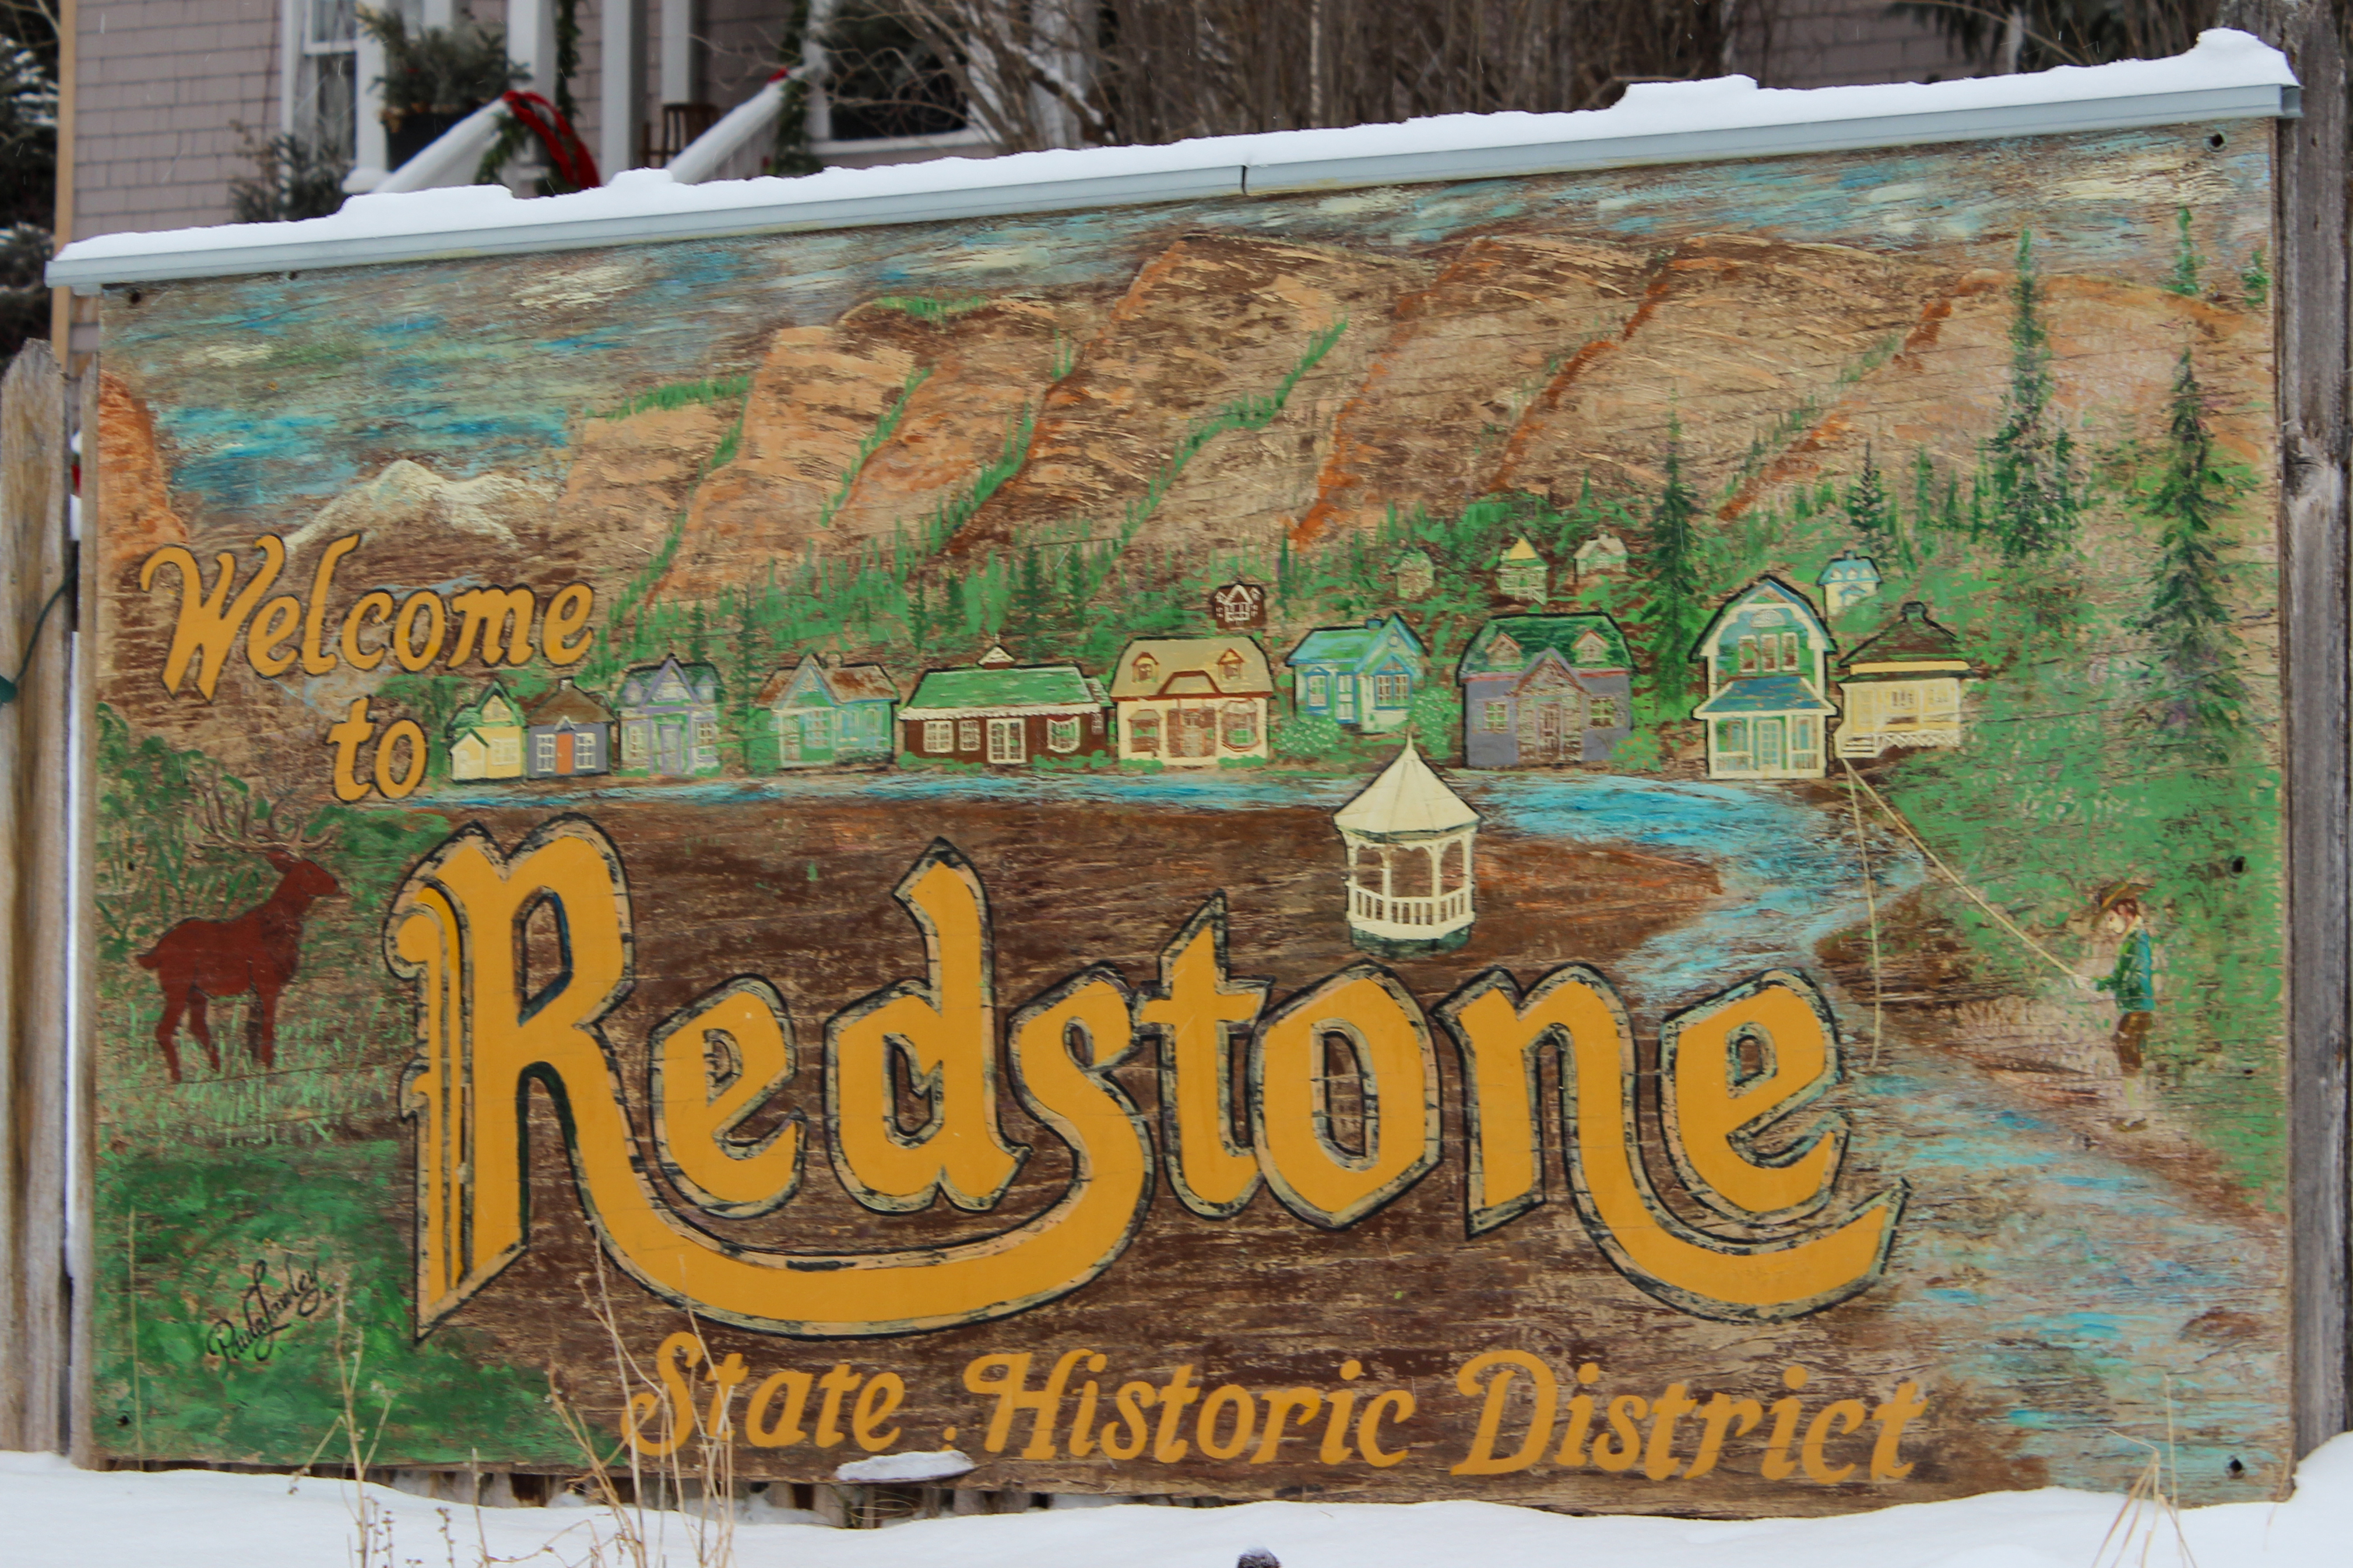 A painted wooden sign, depicting a colorful village, elk, and trees. The signage reads "Welcome to Redstone State Historic District."